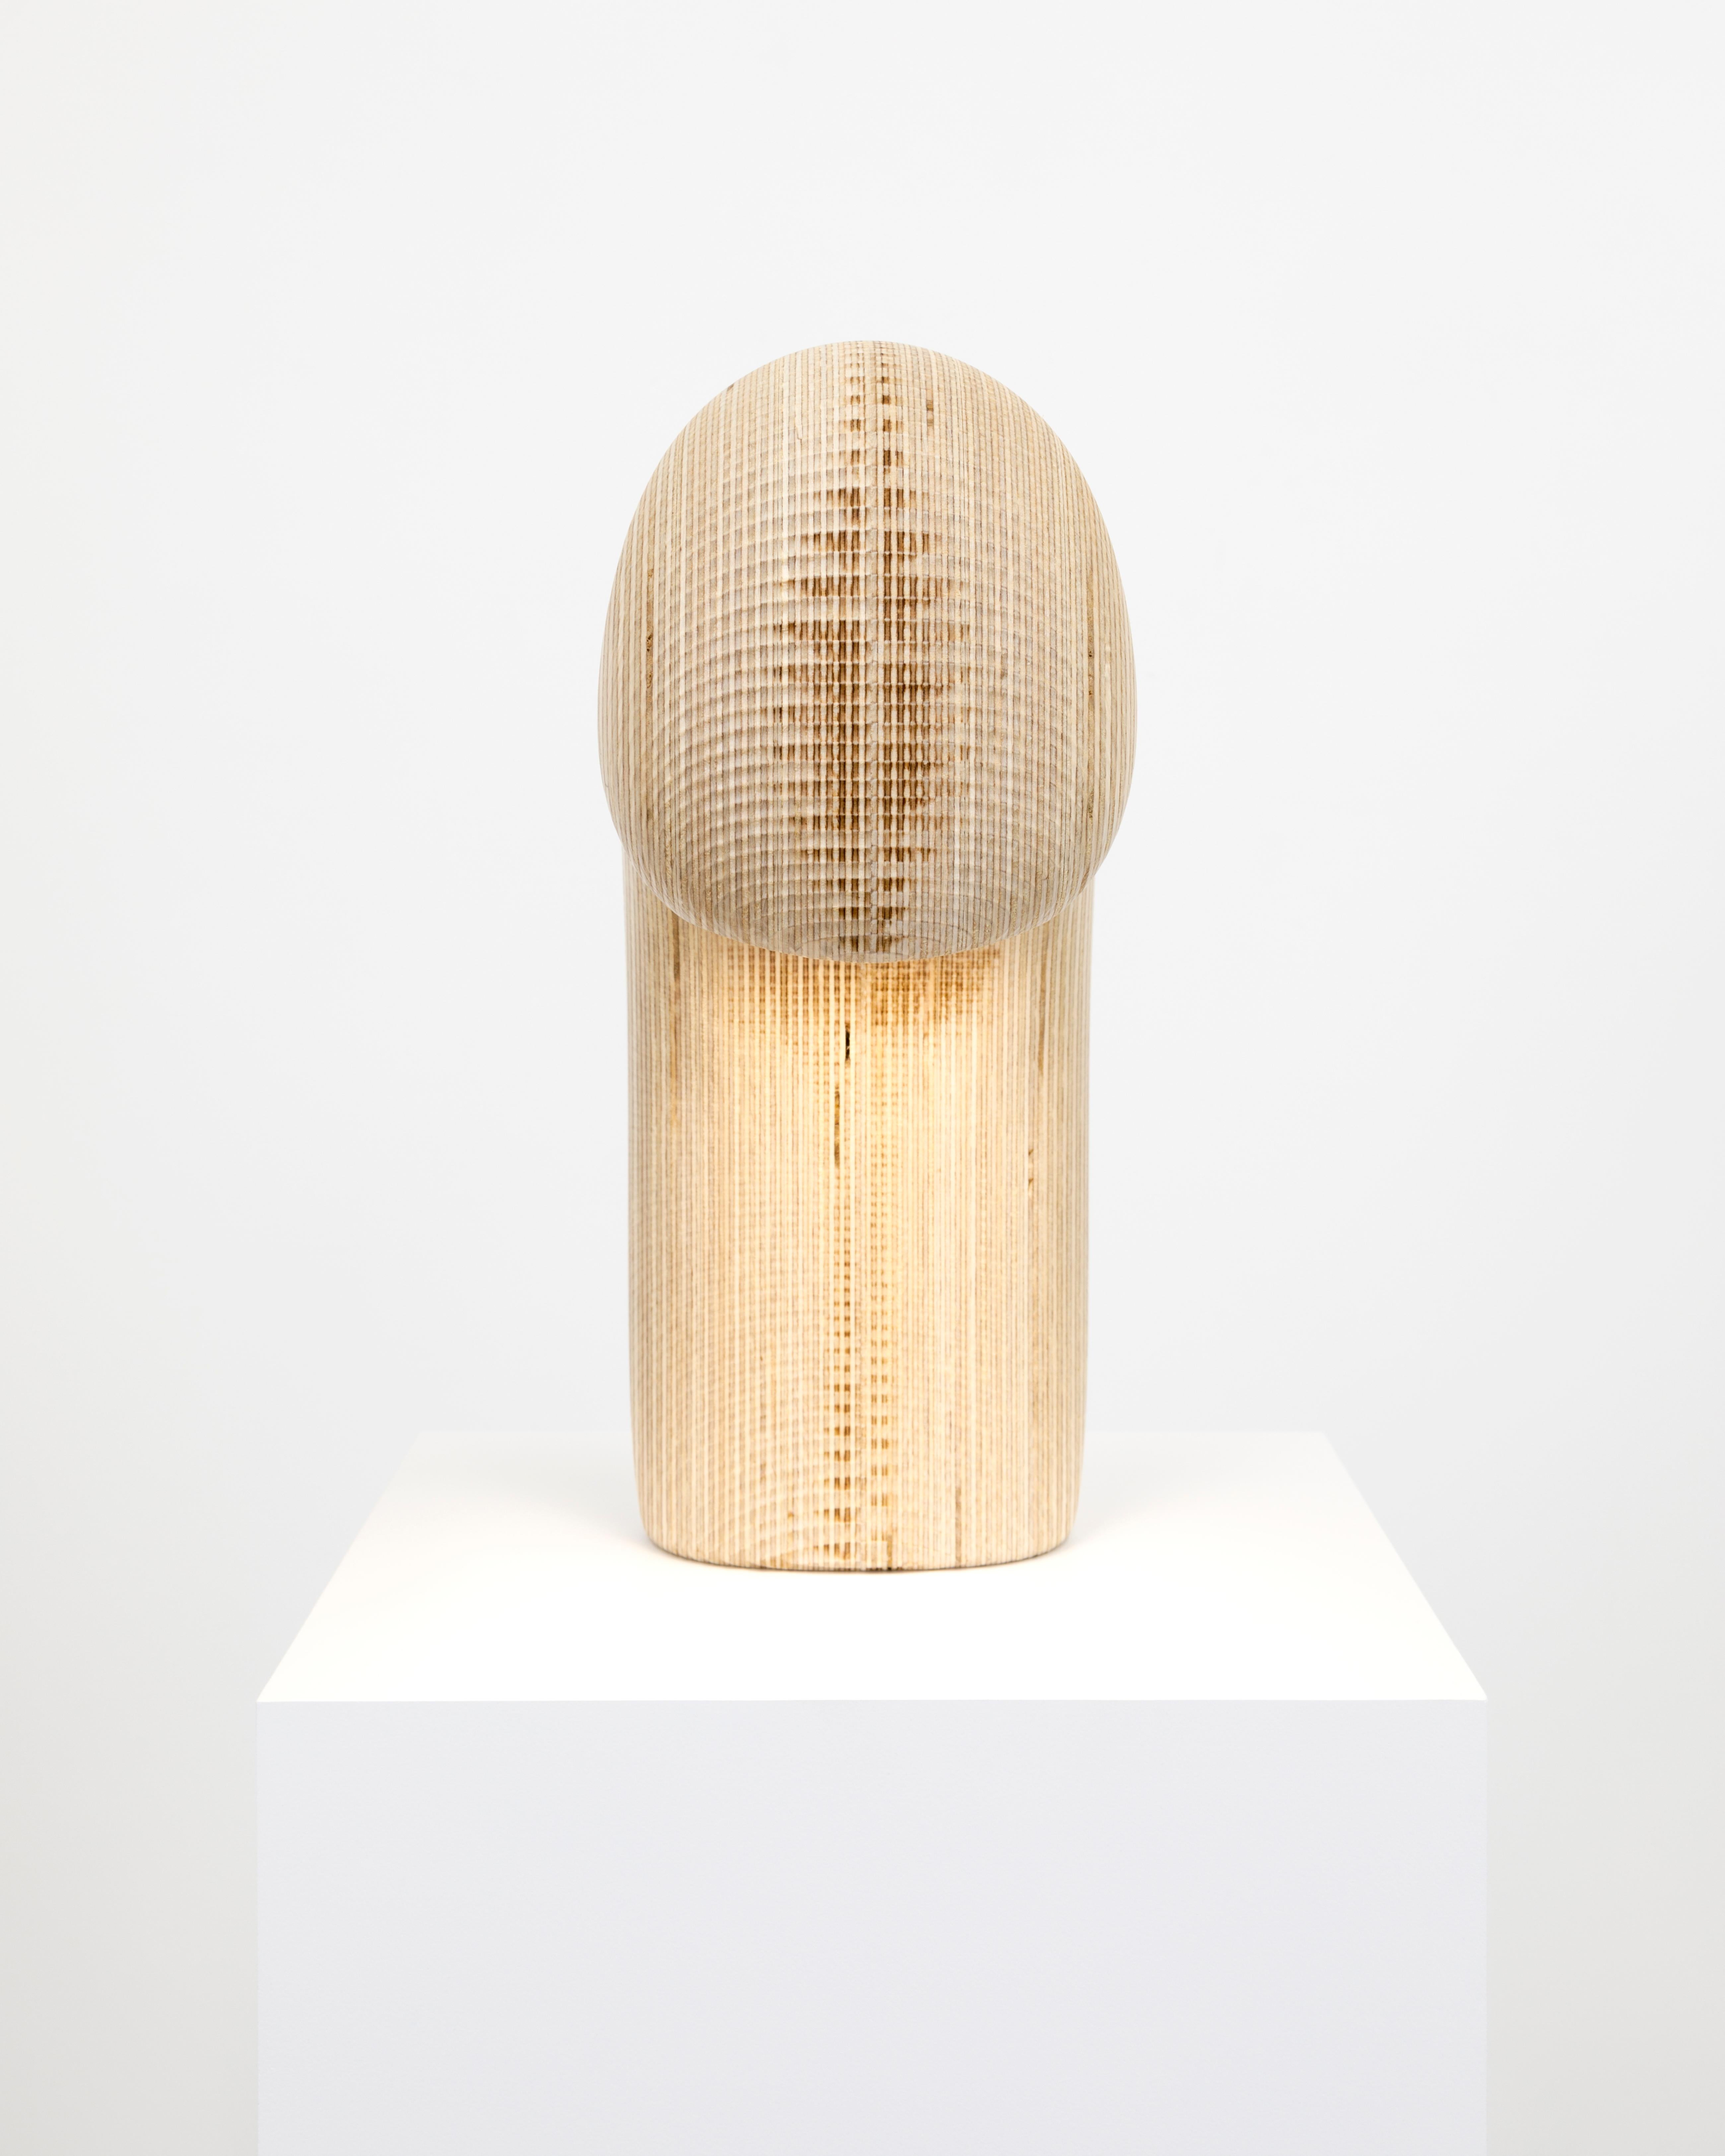 Daniel Arsham [American, b.1980] gazoo table lamp, 2021
Birch
Measures: 14 x 6 x 11 inches
36 x 15 x 28 cm
Edition of 250

Daniel Arsham’s practice exists at the intersection of art, architecture and performance. Through his work, Arsham poetically